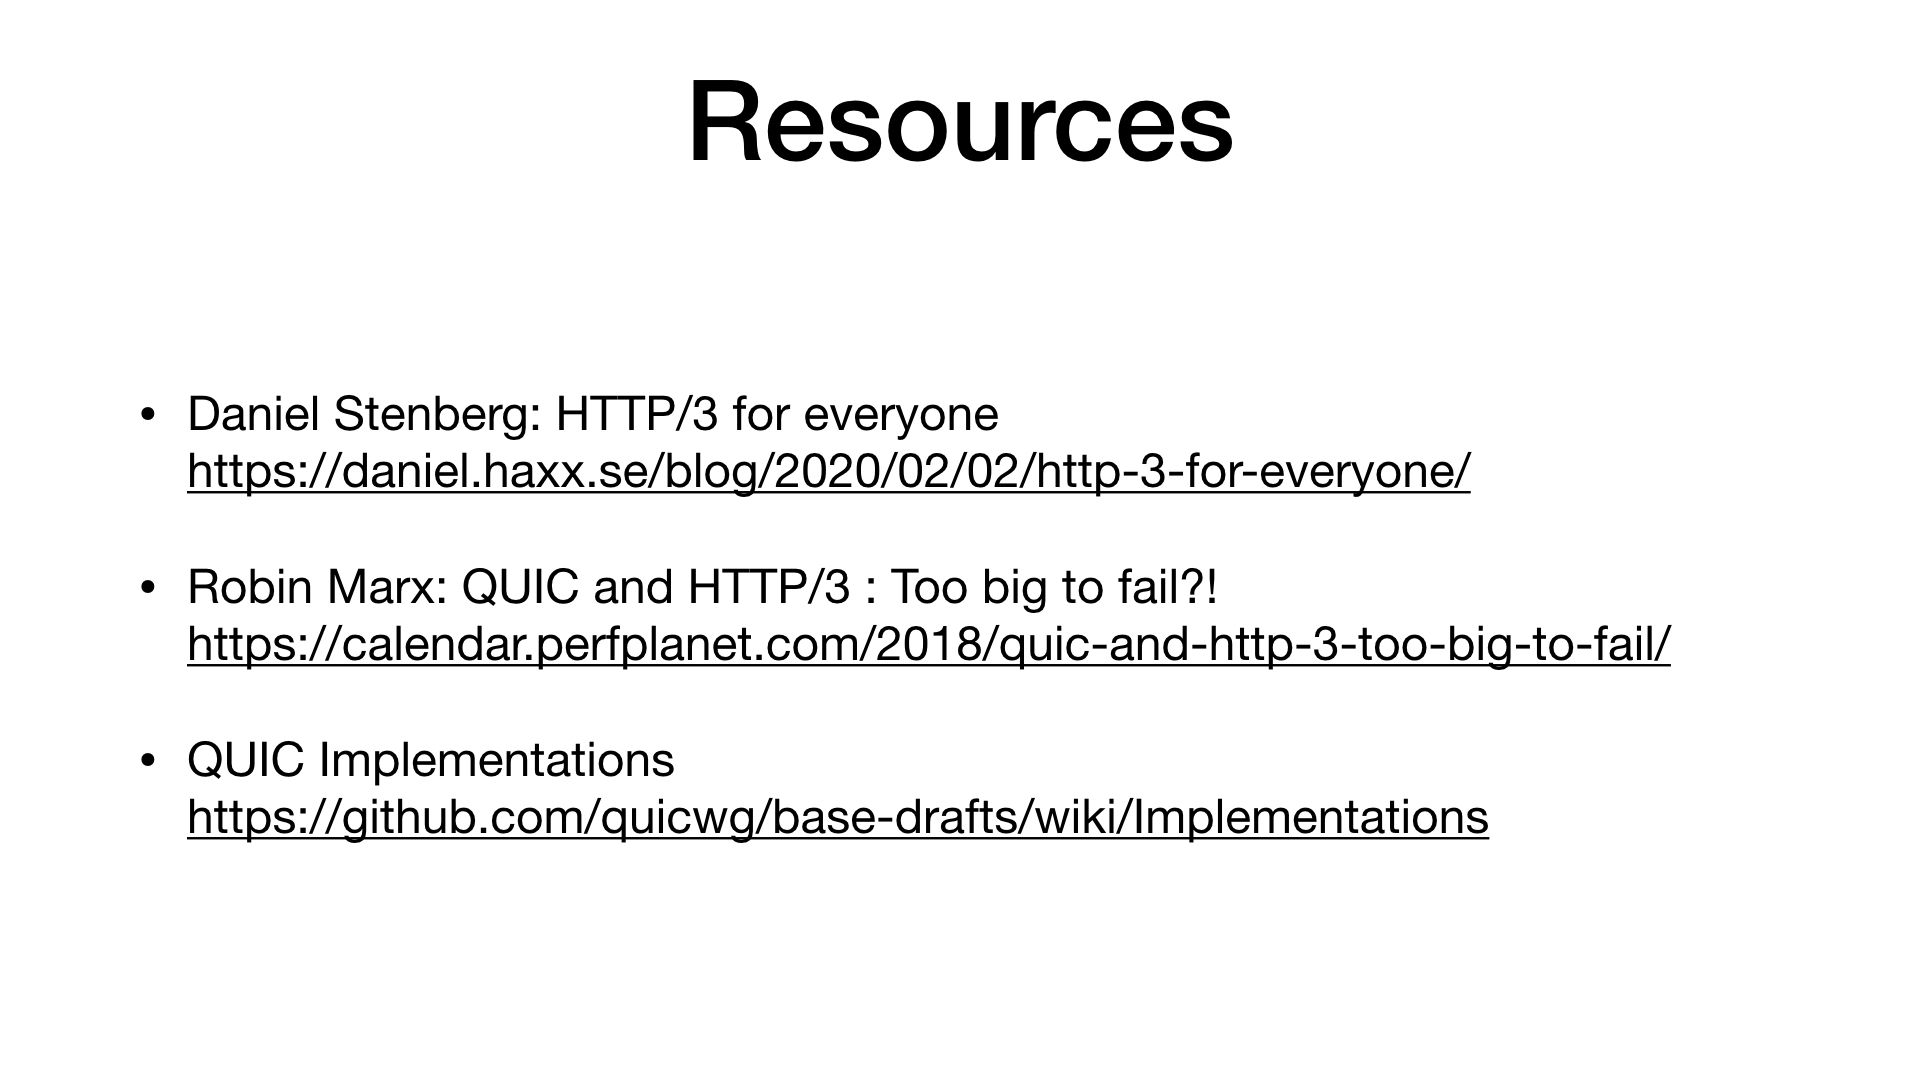 Who is ready for HTTP/3? - Slide 29